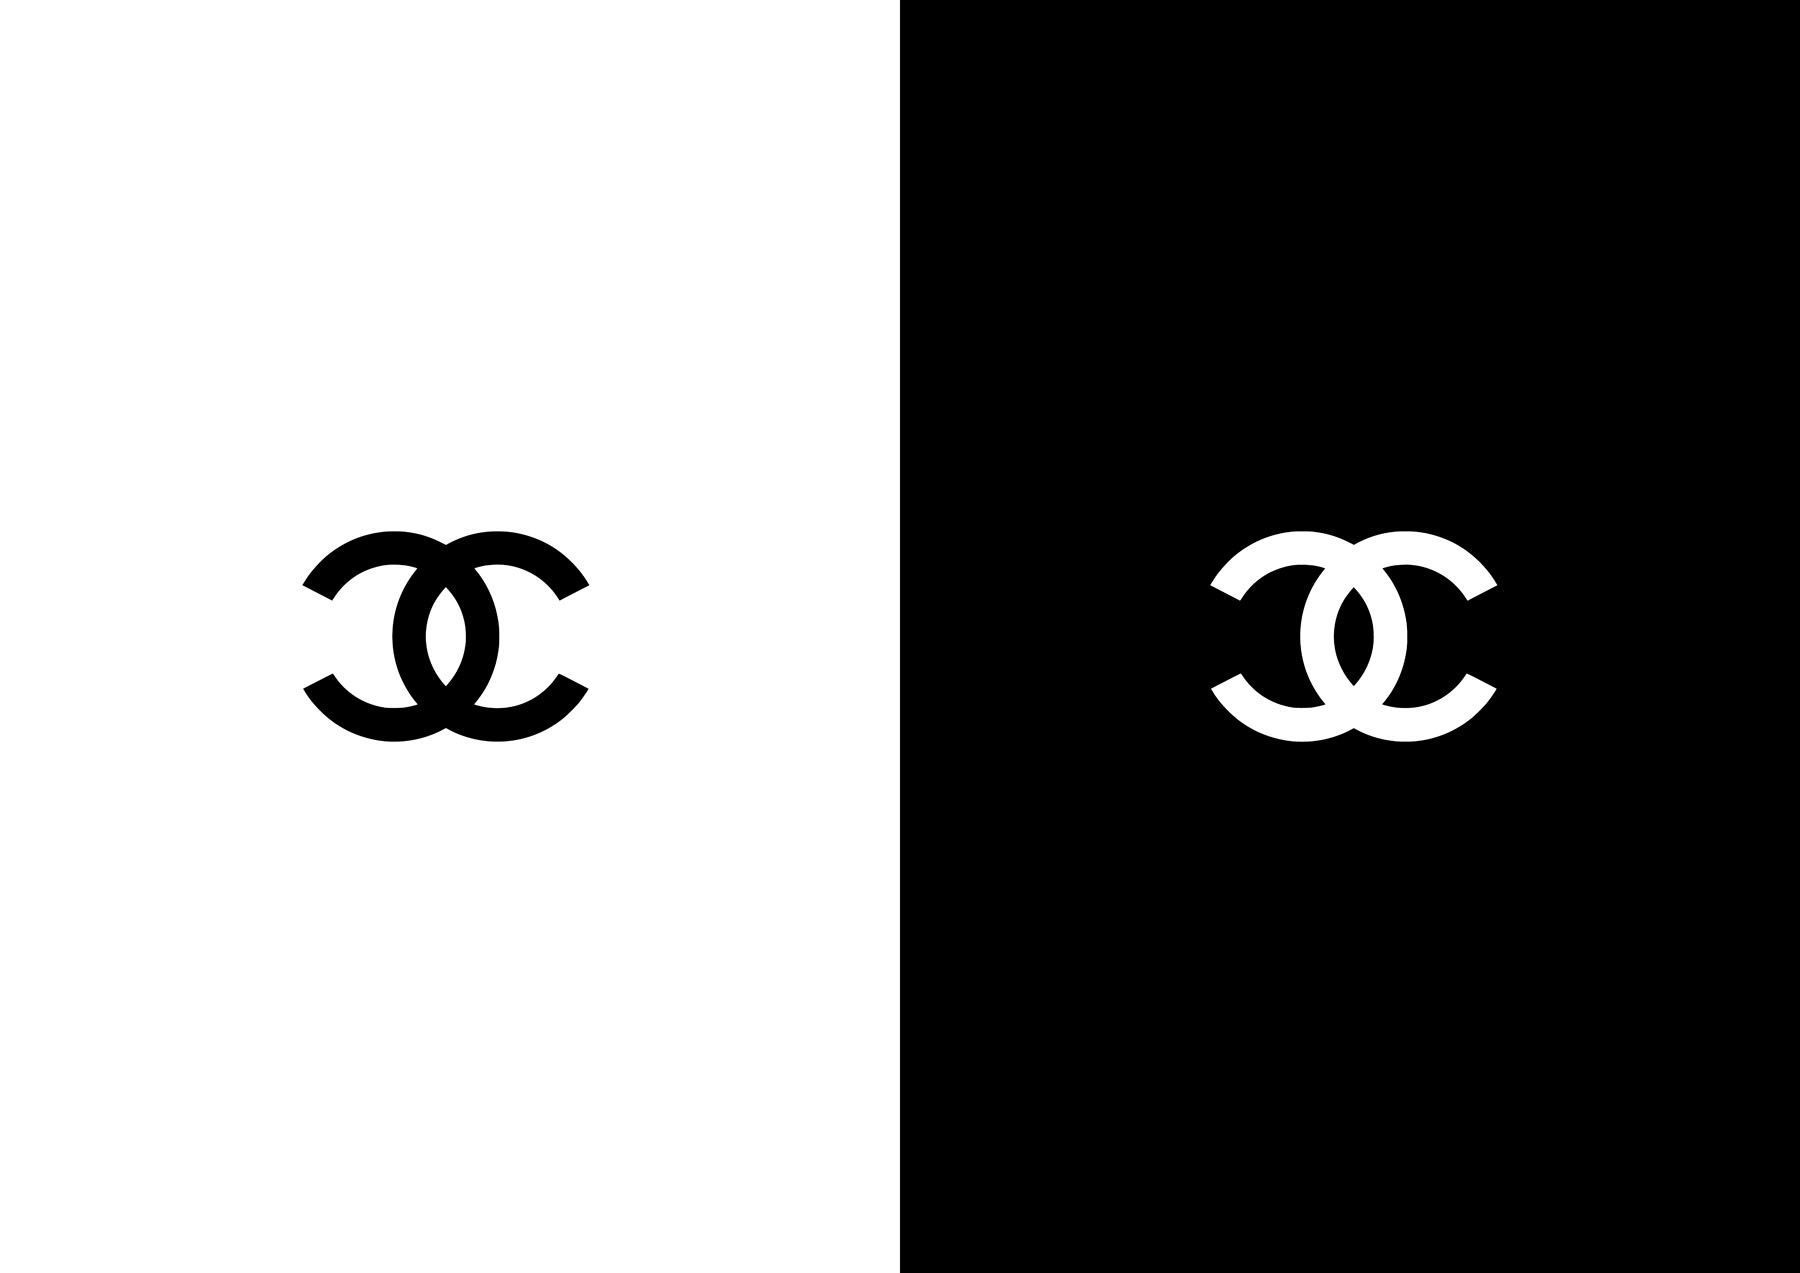 Chanel Wallpapers Archives - Page 3 of 4 - Wallpaper